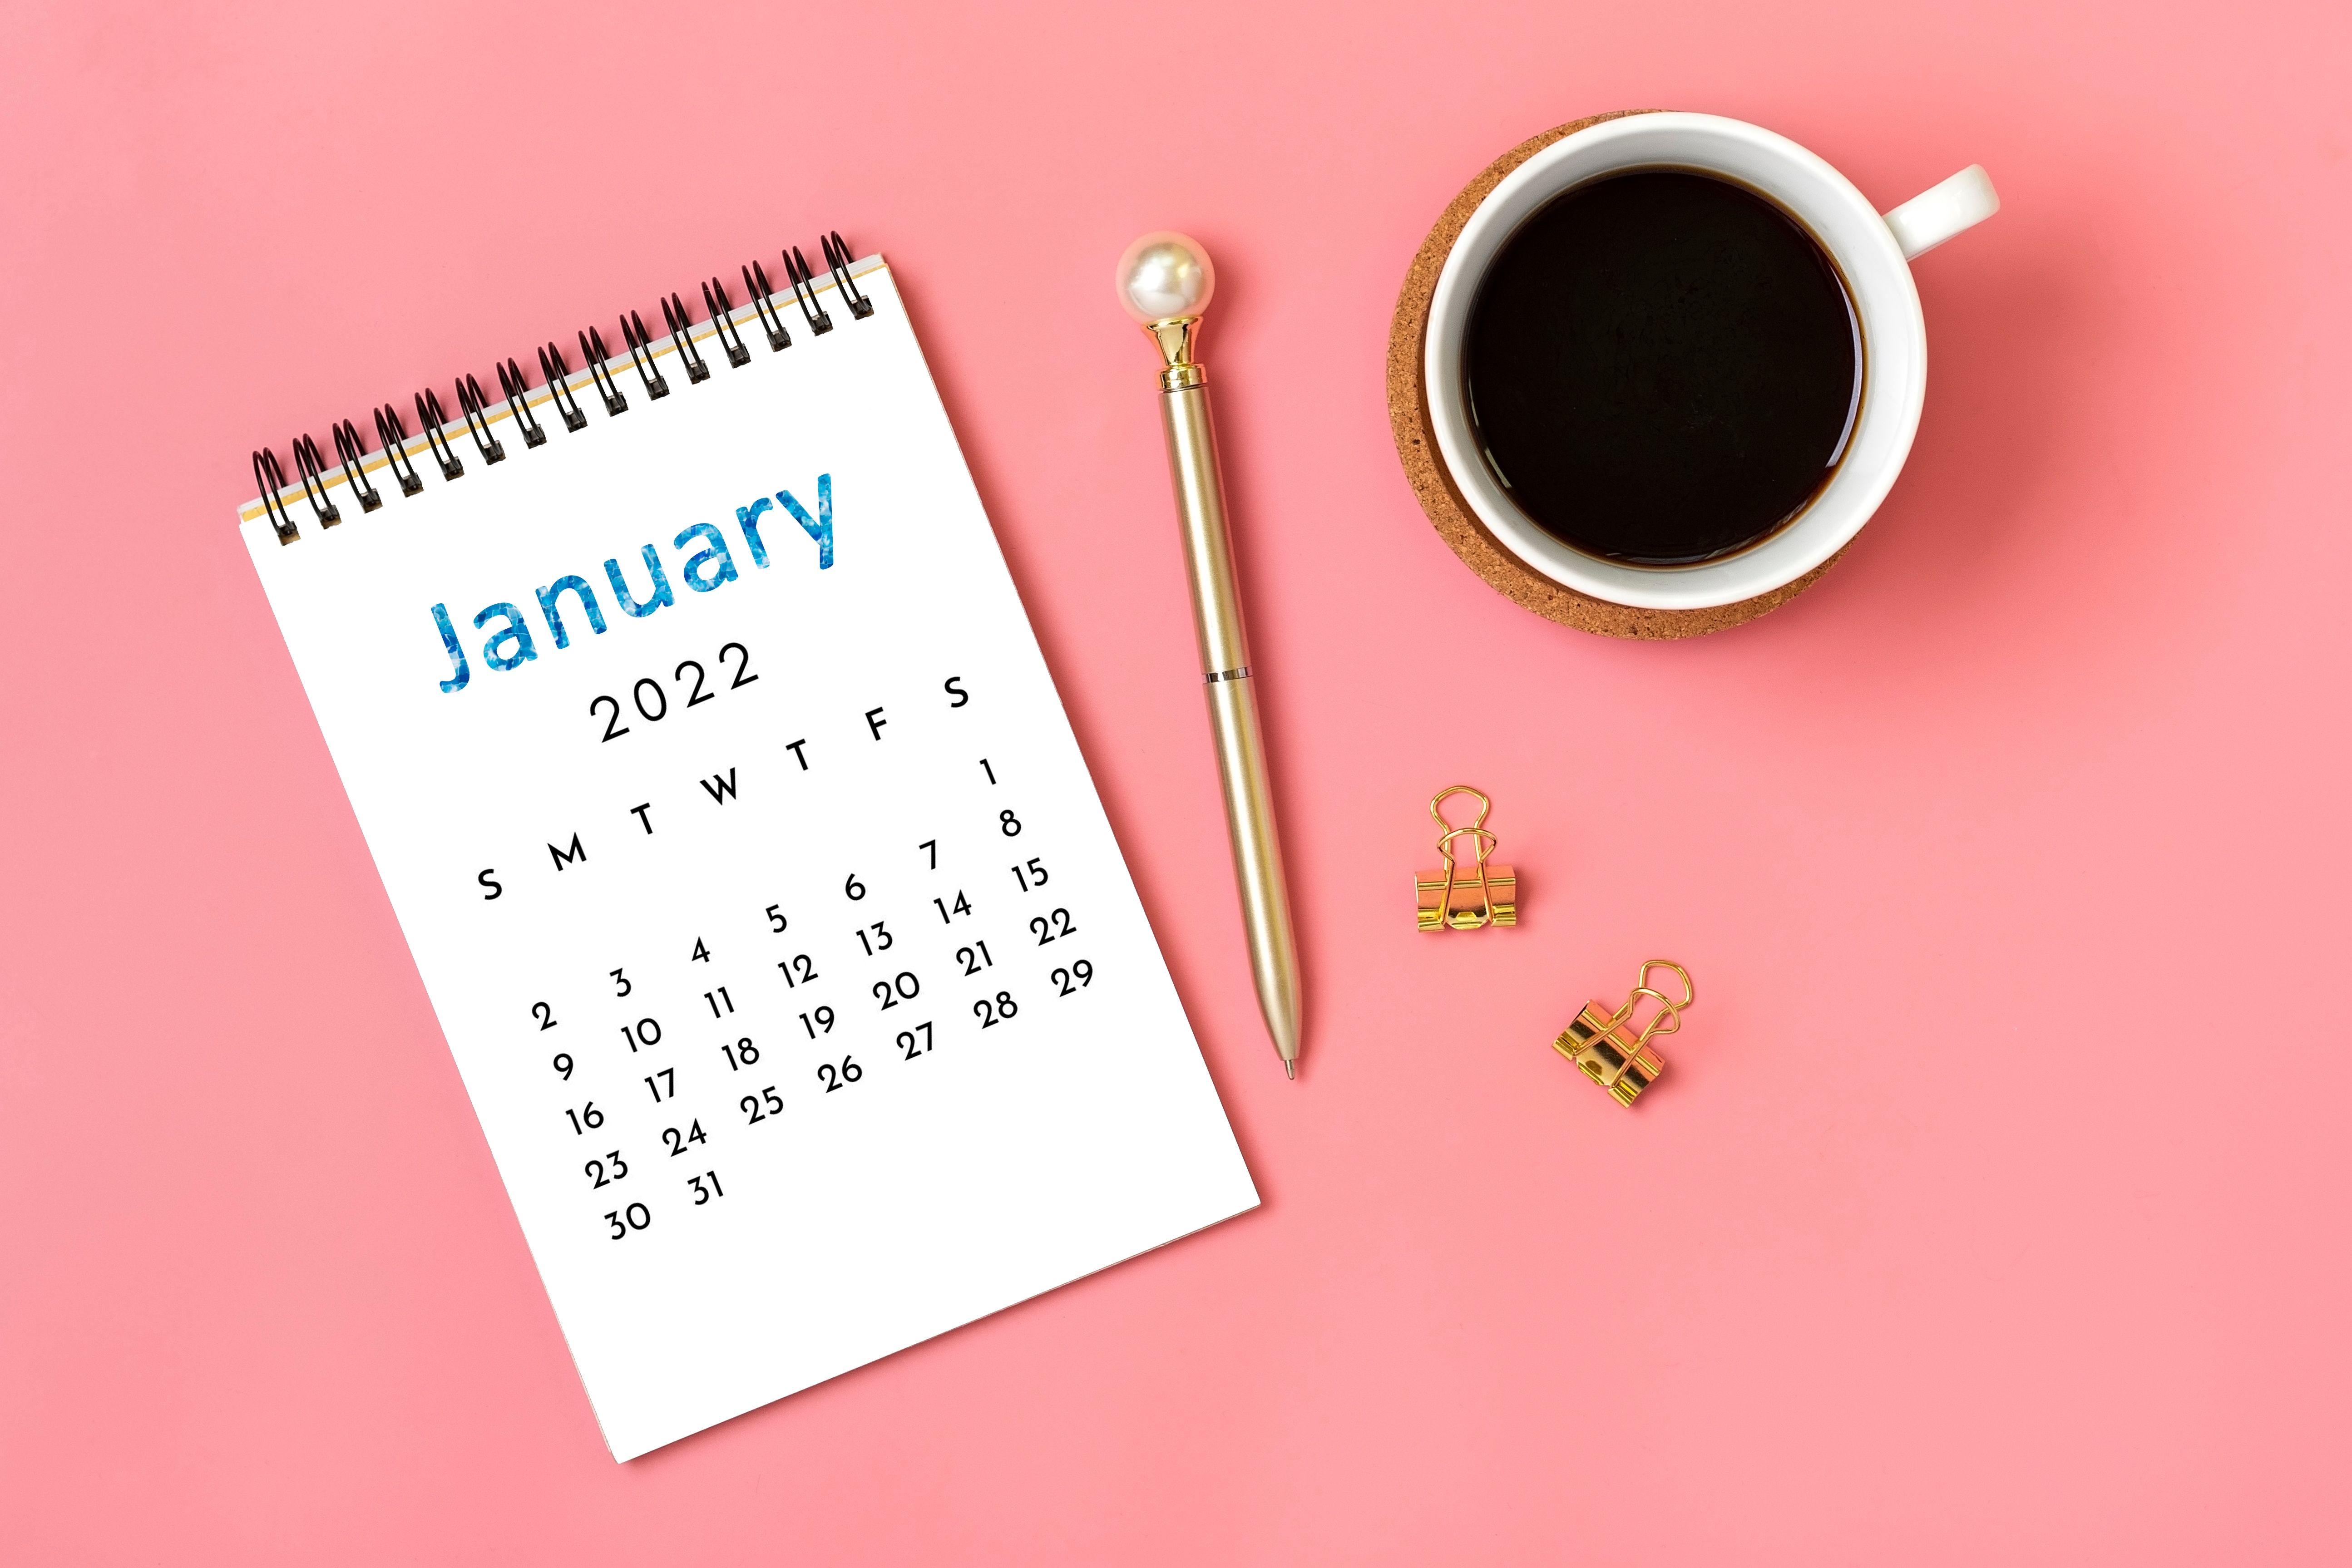 An open 2022 calendar and a cup of coffee prepare us to start a new year.